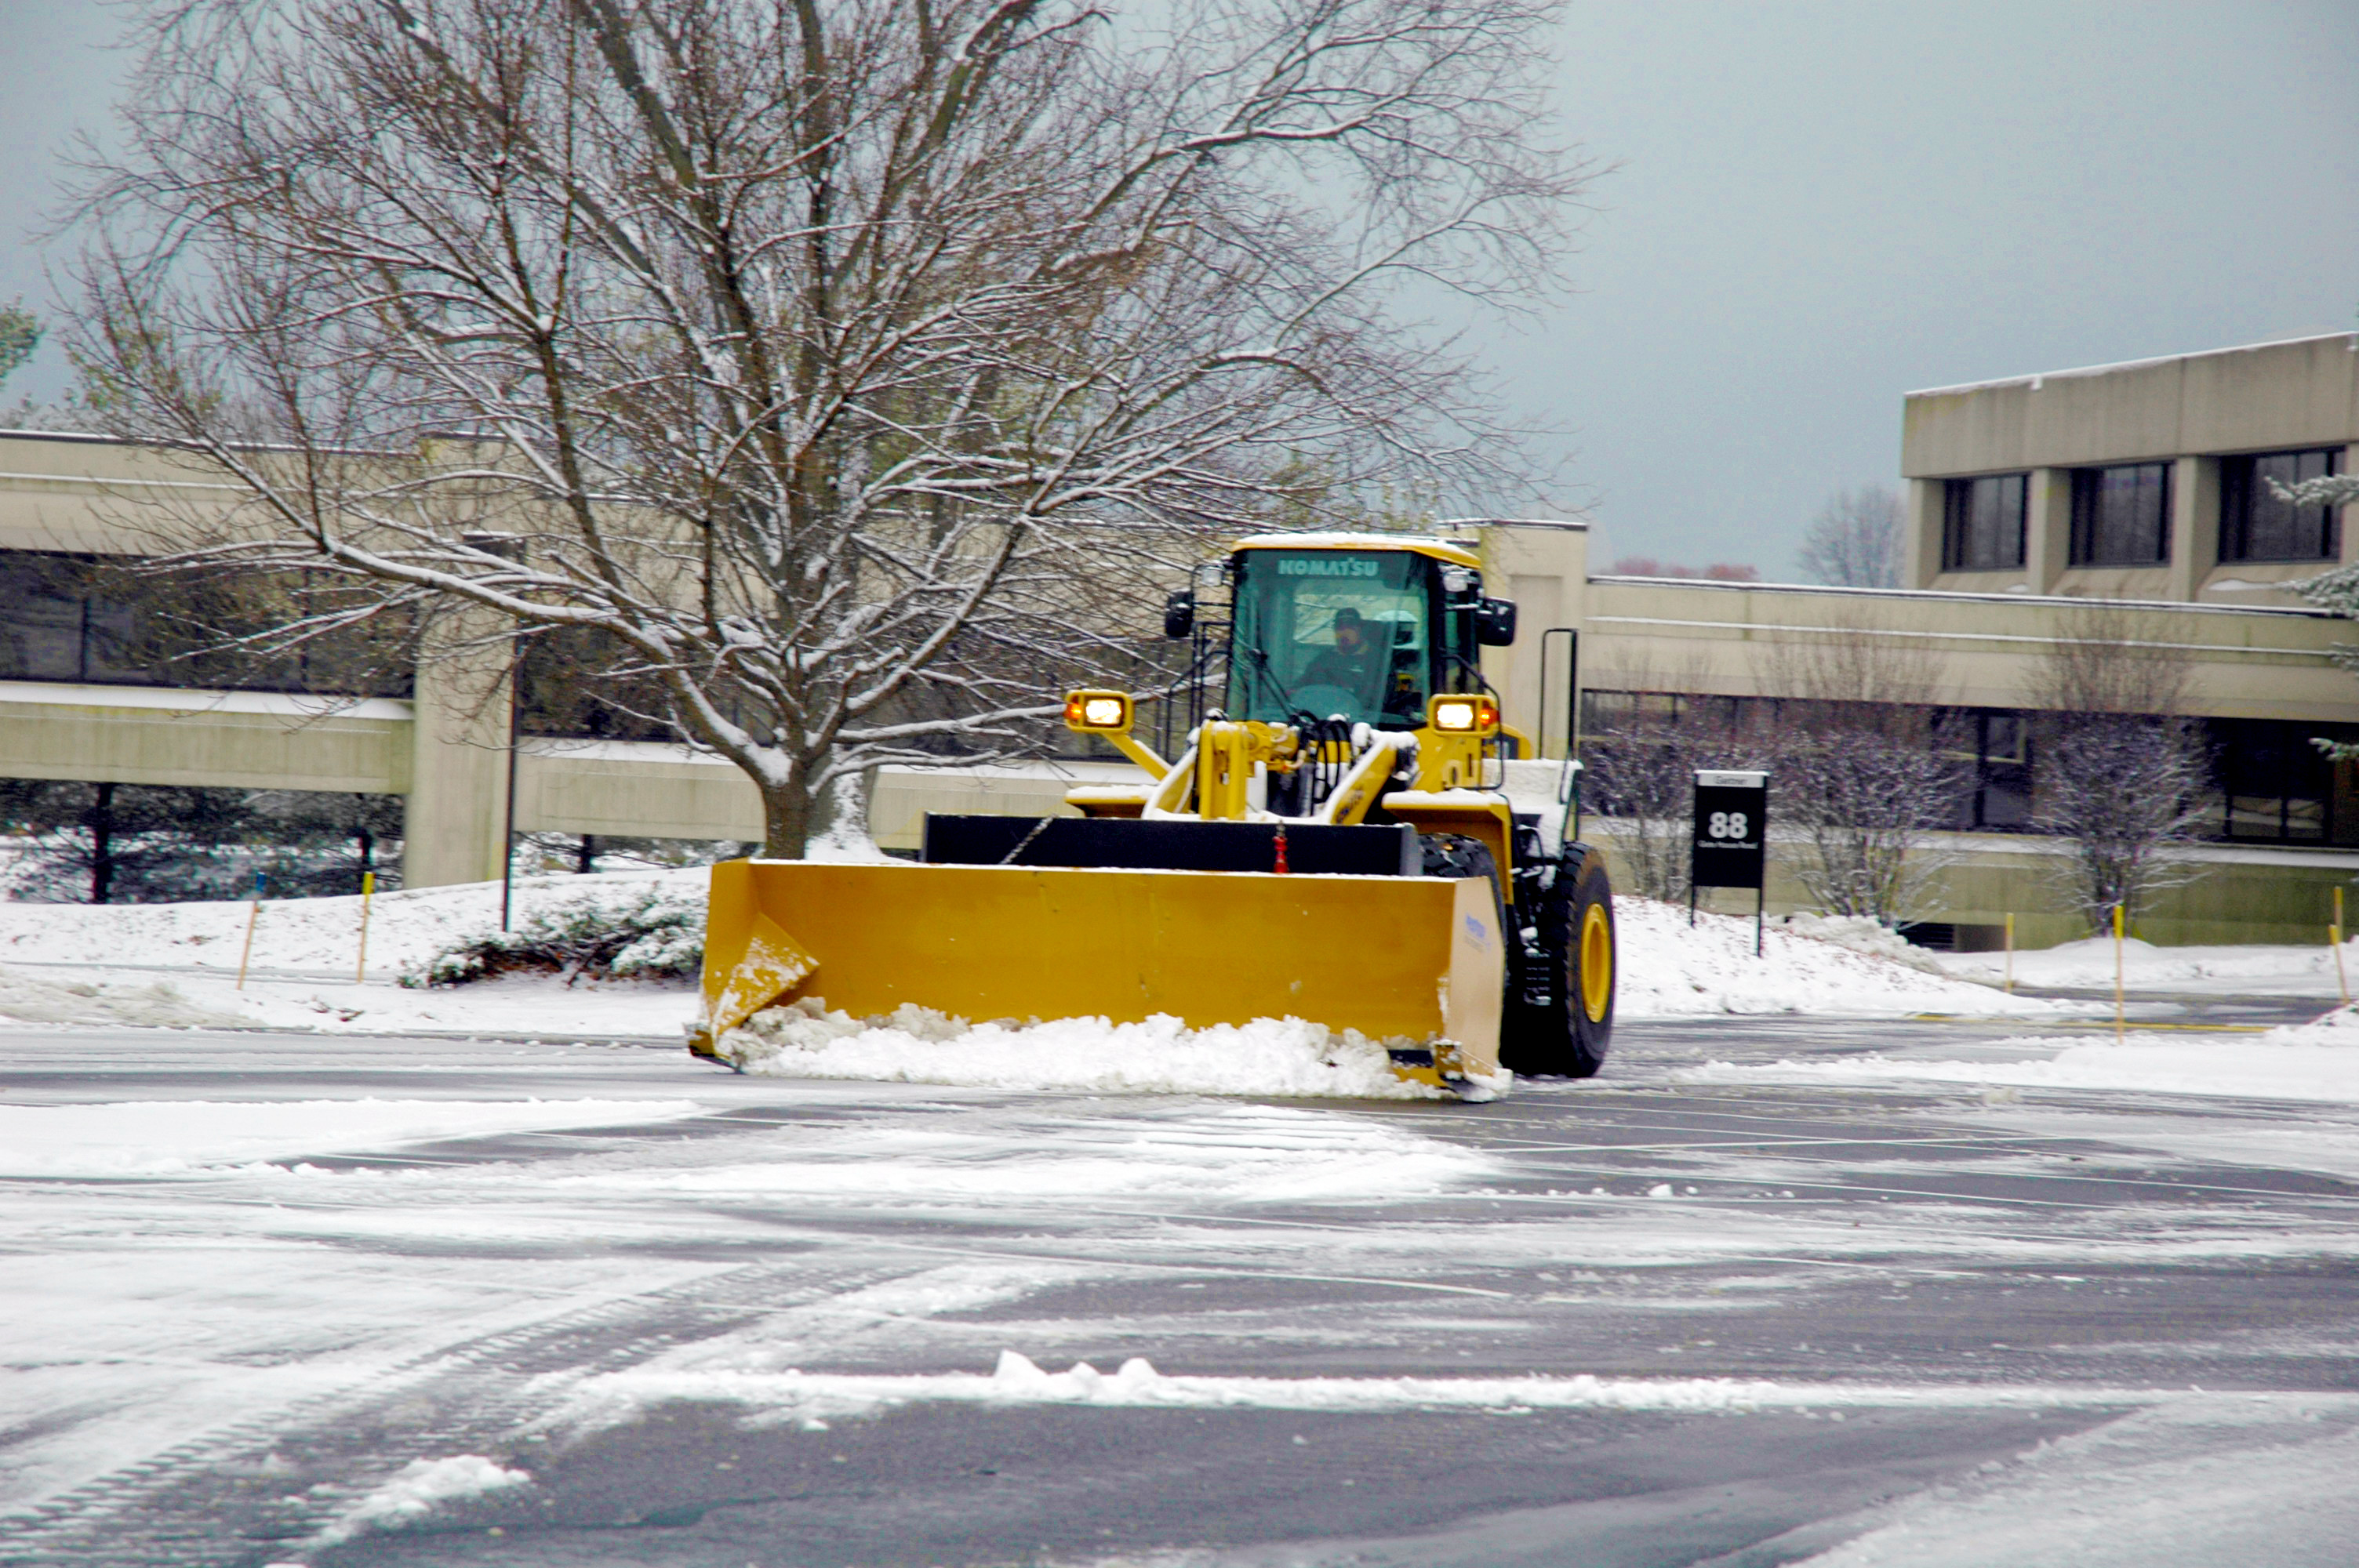 commercial-snow-removal-services-eastern-land-management-ct-ny